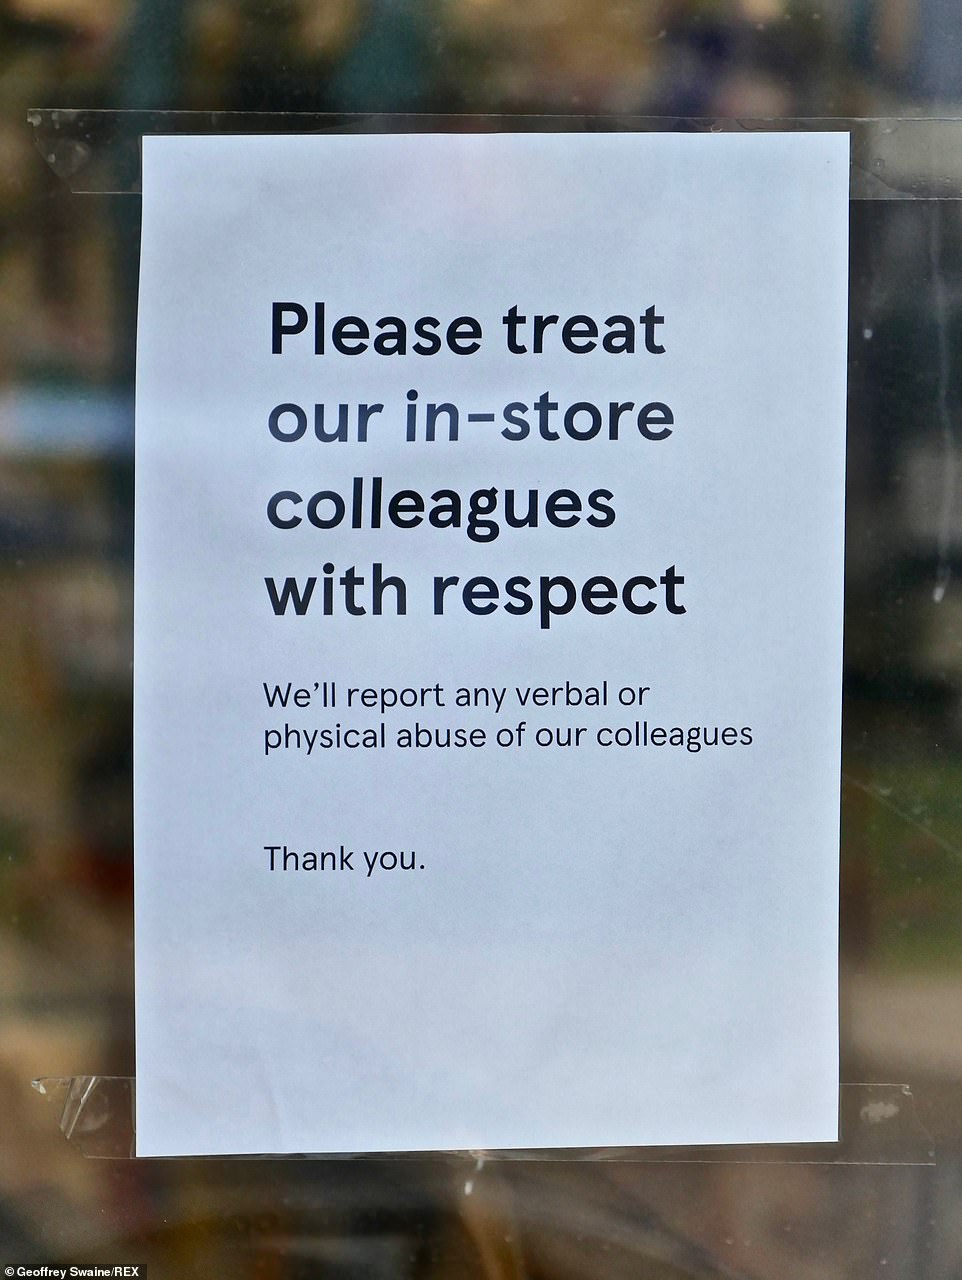 A Tesco Express in Emmer Green in Reading has put up a sign which reads: 'Please treat our in-store colleagues with respect. We'll report any verbal or physical abuse of our colleagues. Thank you'